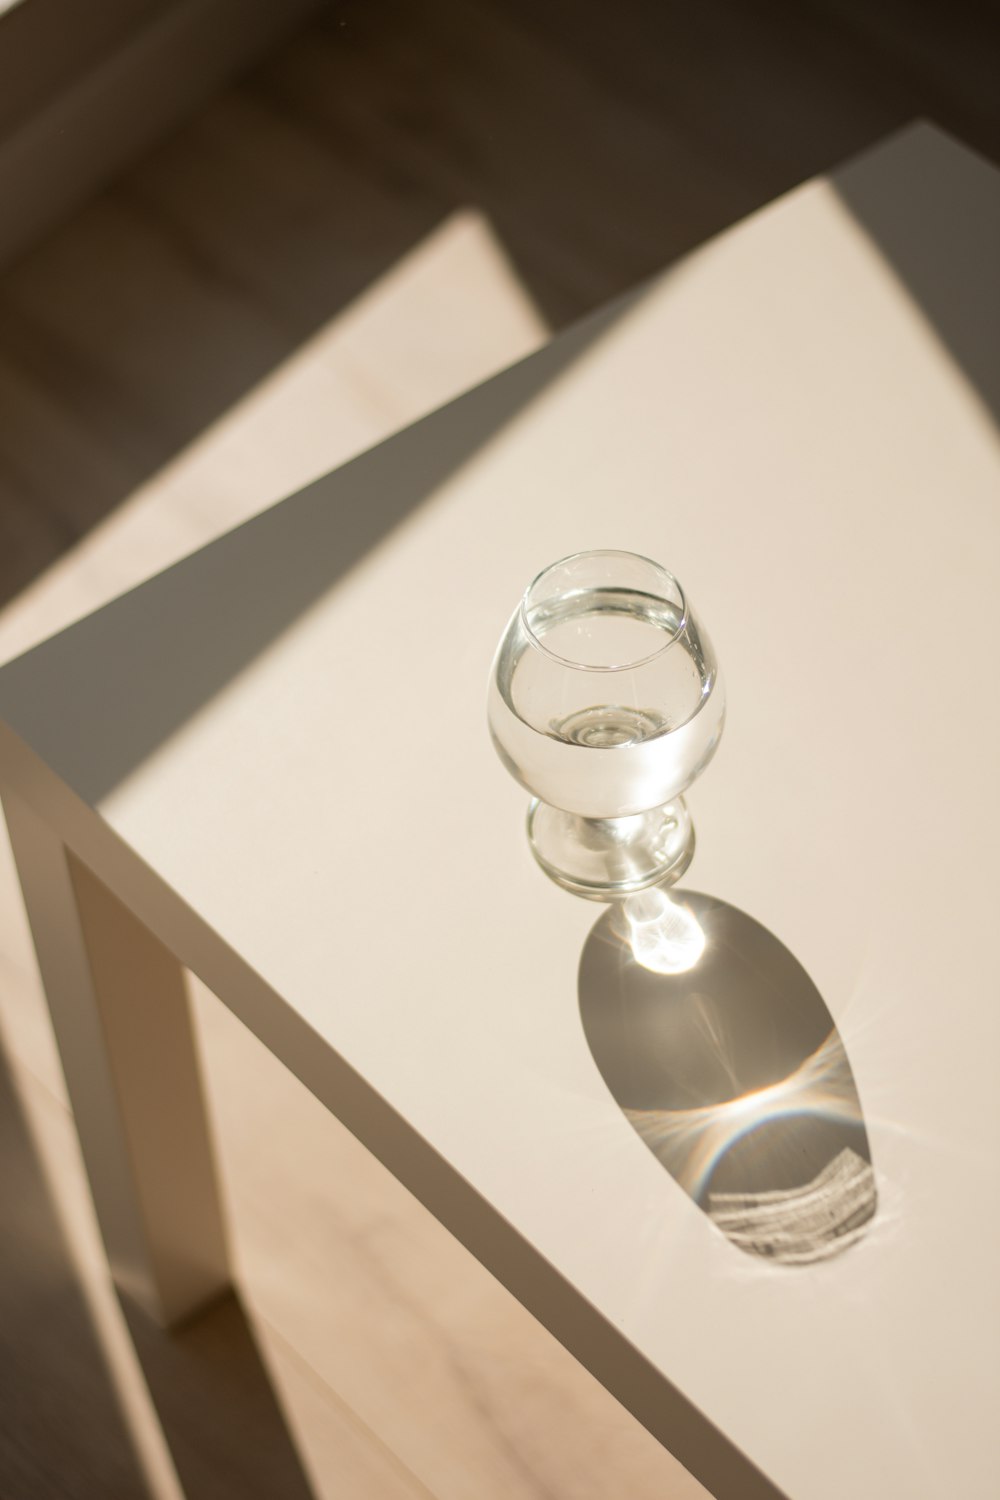 clear glass ball on white wooden table